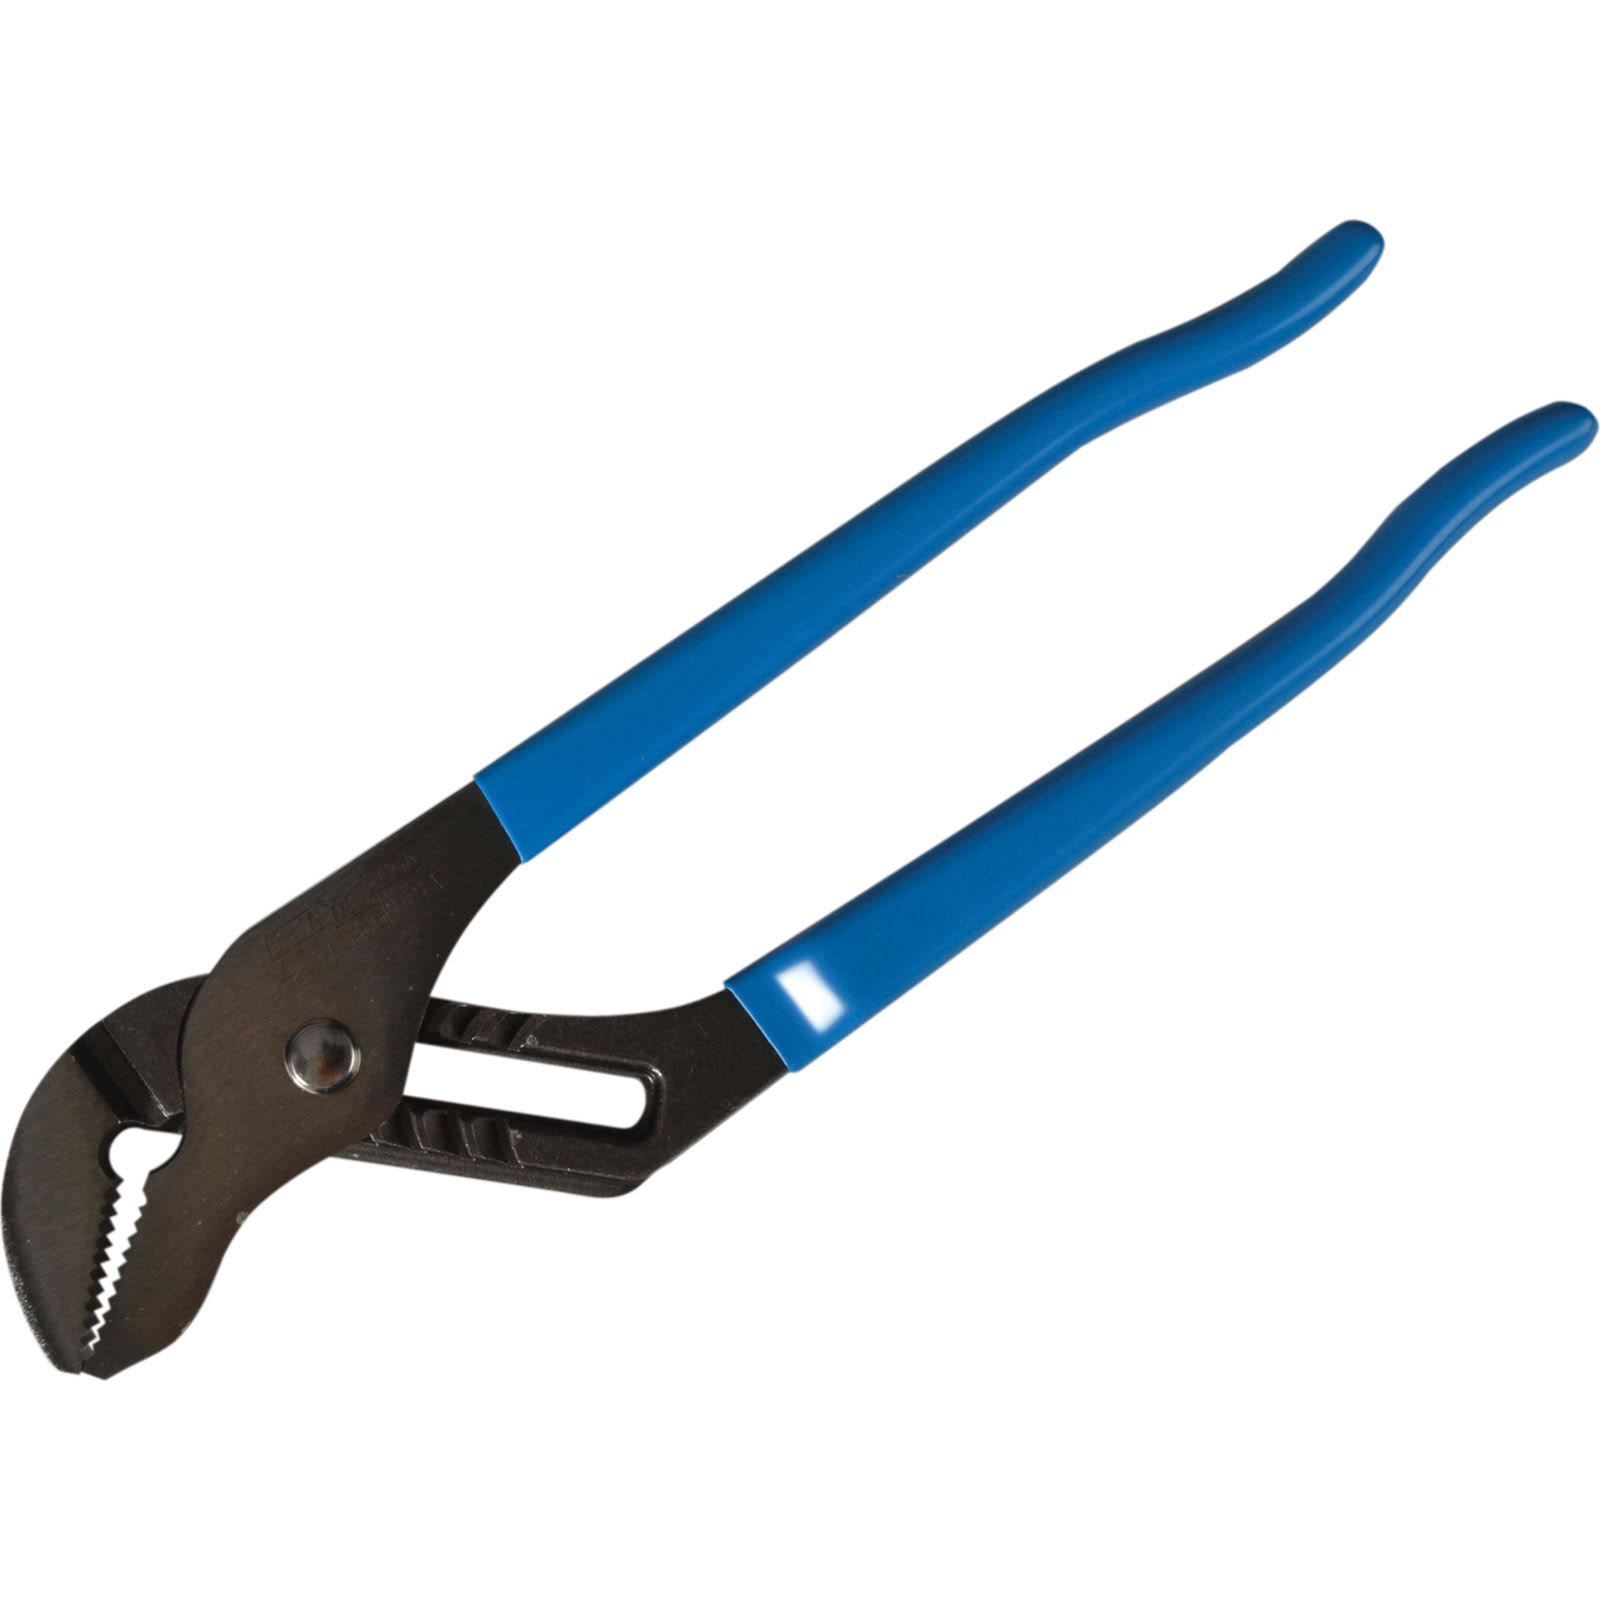 Channellock Tongue and Groove Plier - 16in